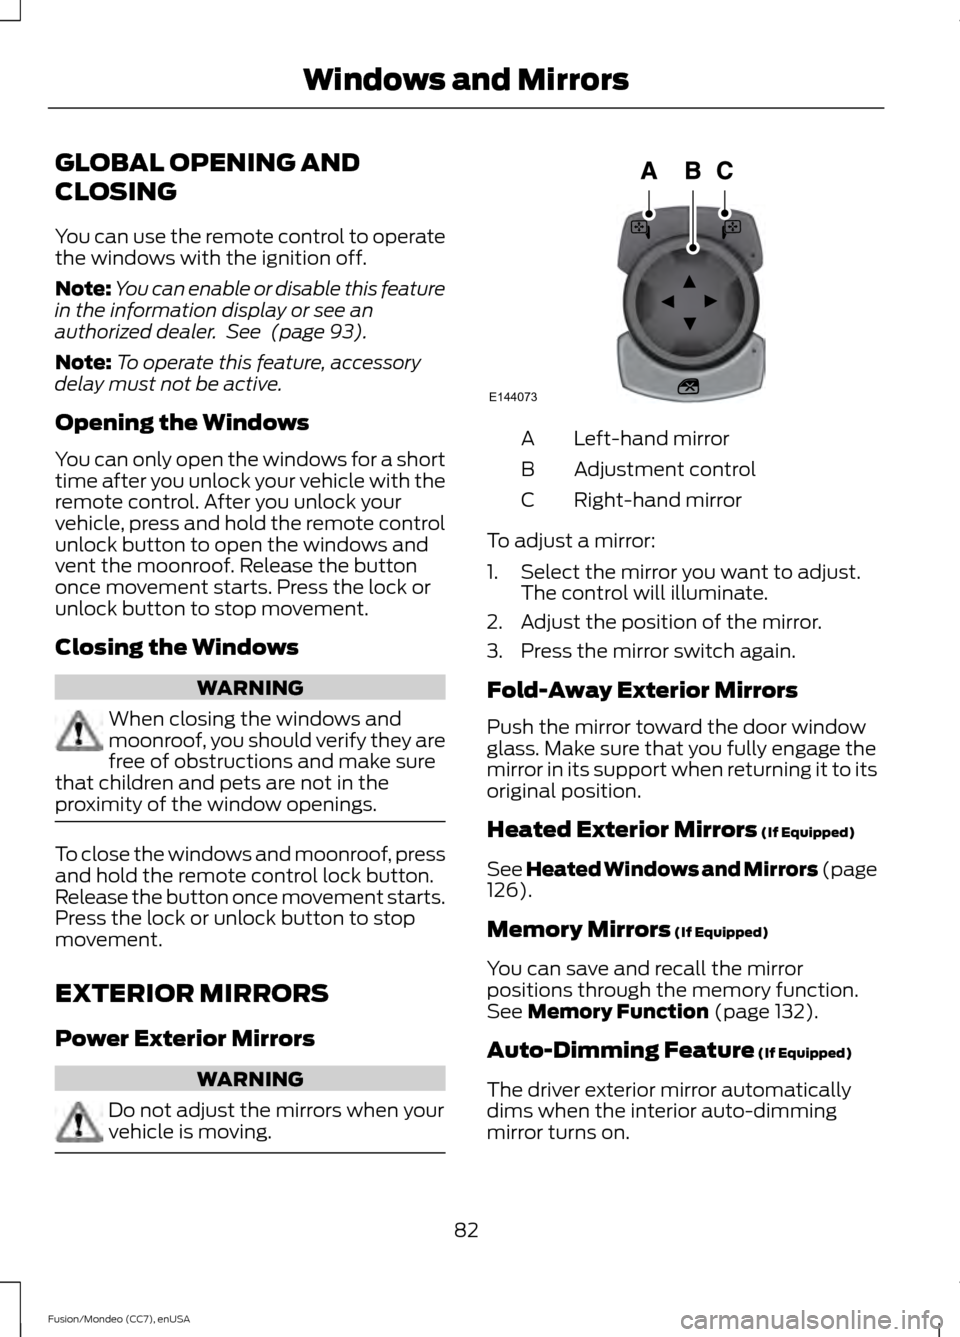 FORD FUSION (AMERICAS) 2015 2.G Owners Manual GLOBAL OPENING AND
CLOSING
You can use the remote control to operate
the windows with the ignition off.
Note:
You can enable or disable this feature
in the information display or see an
authorized dea